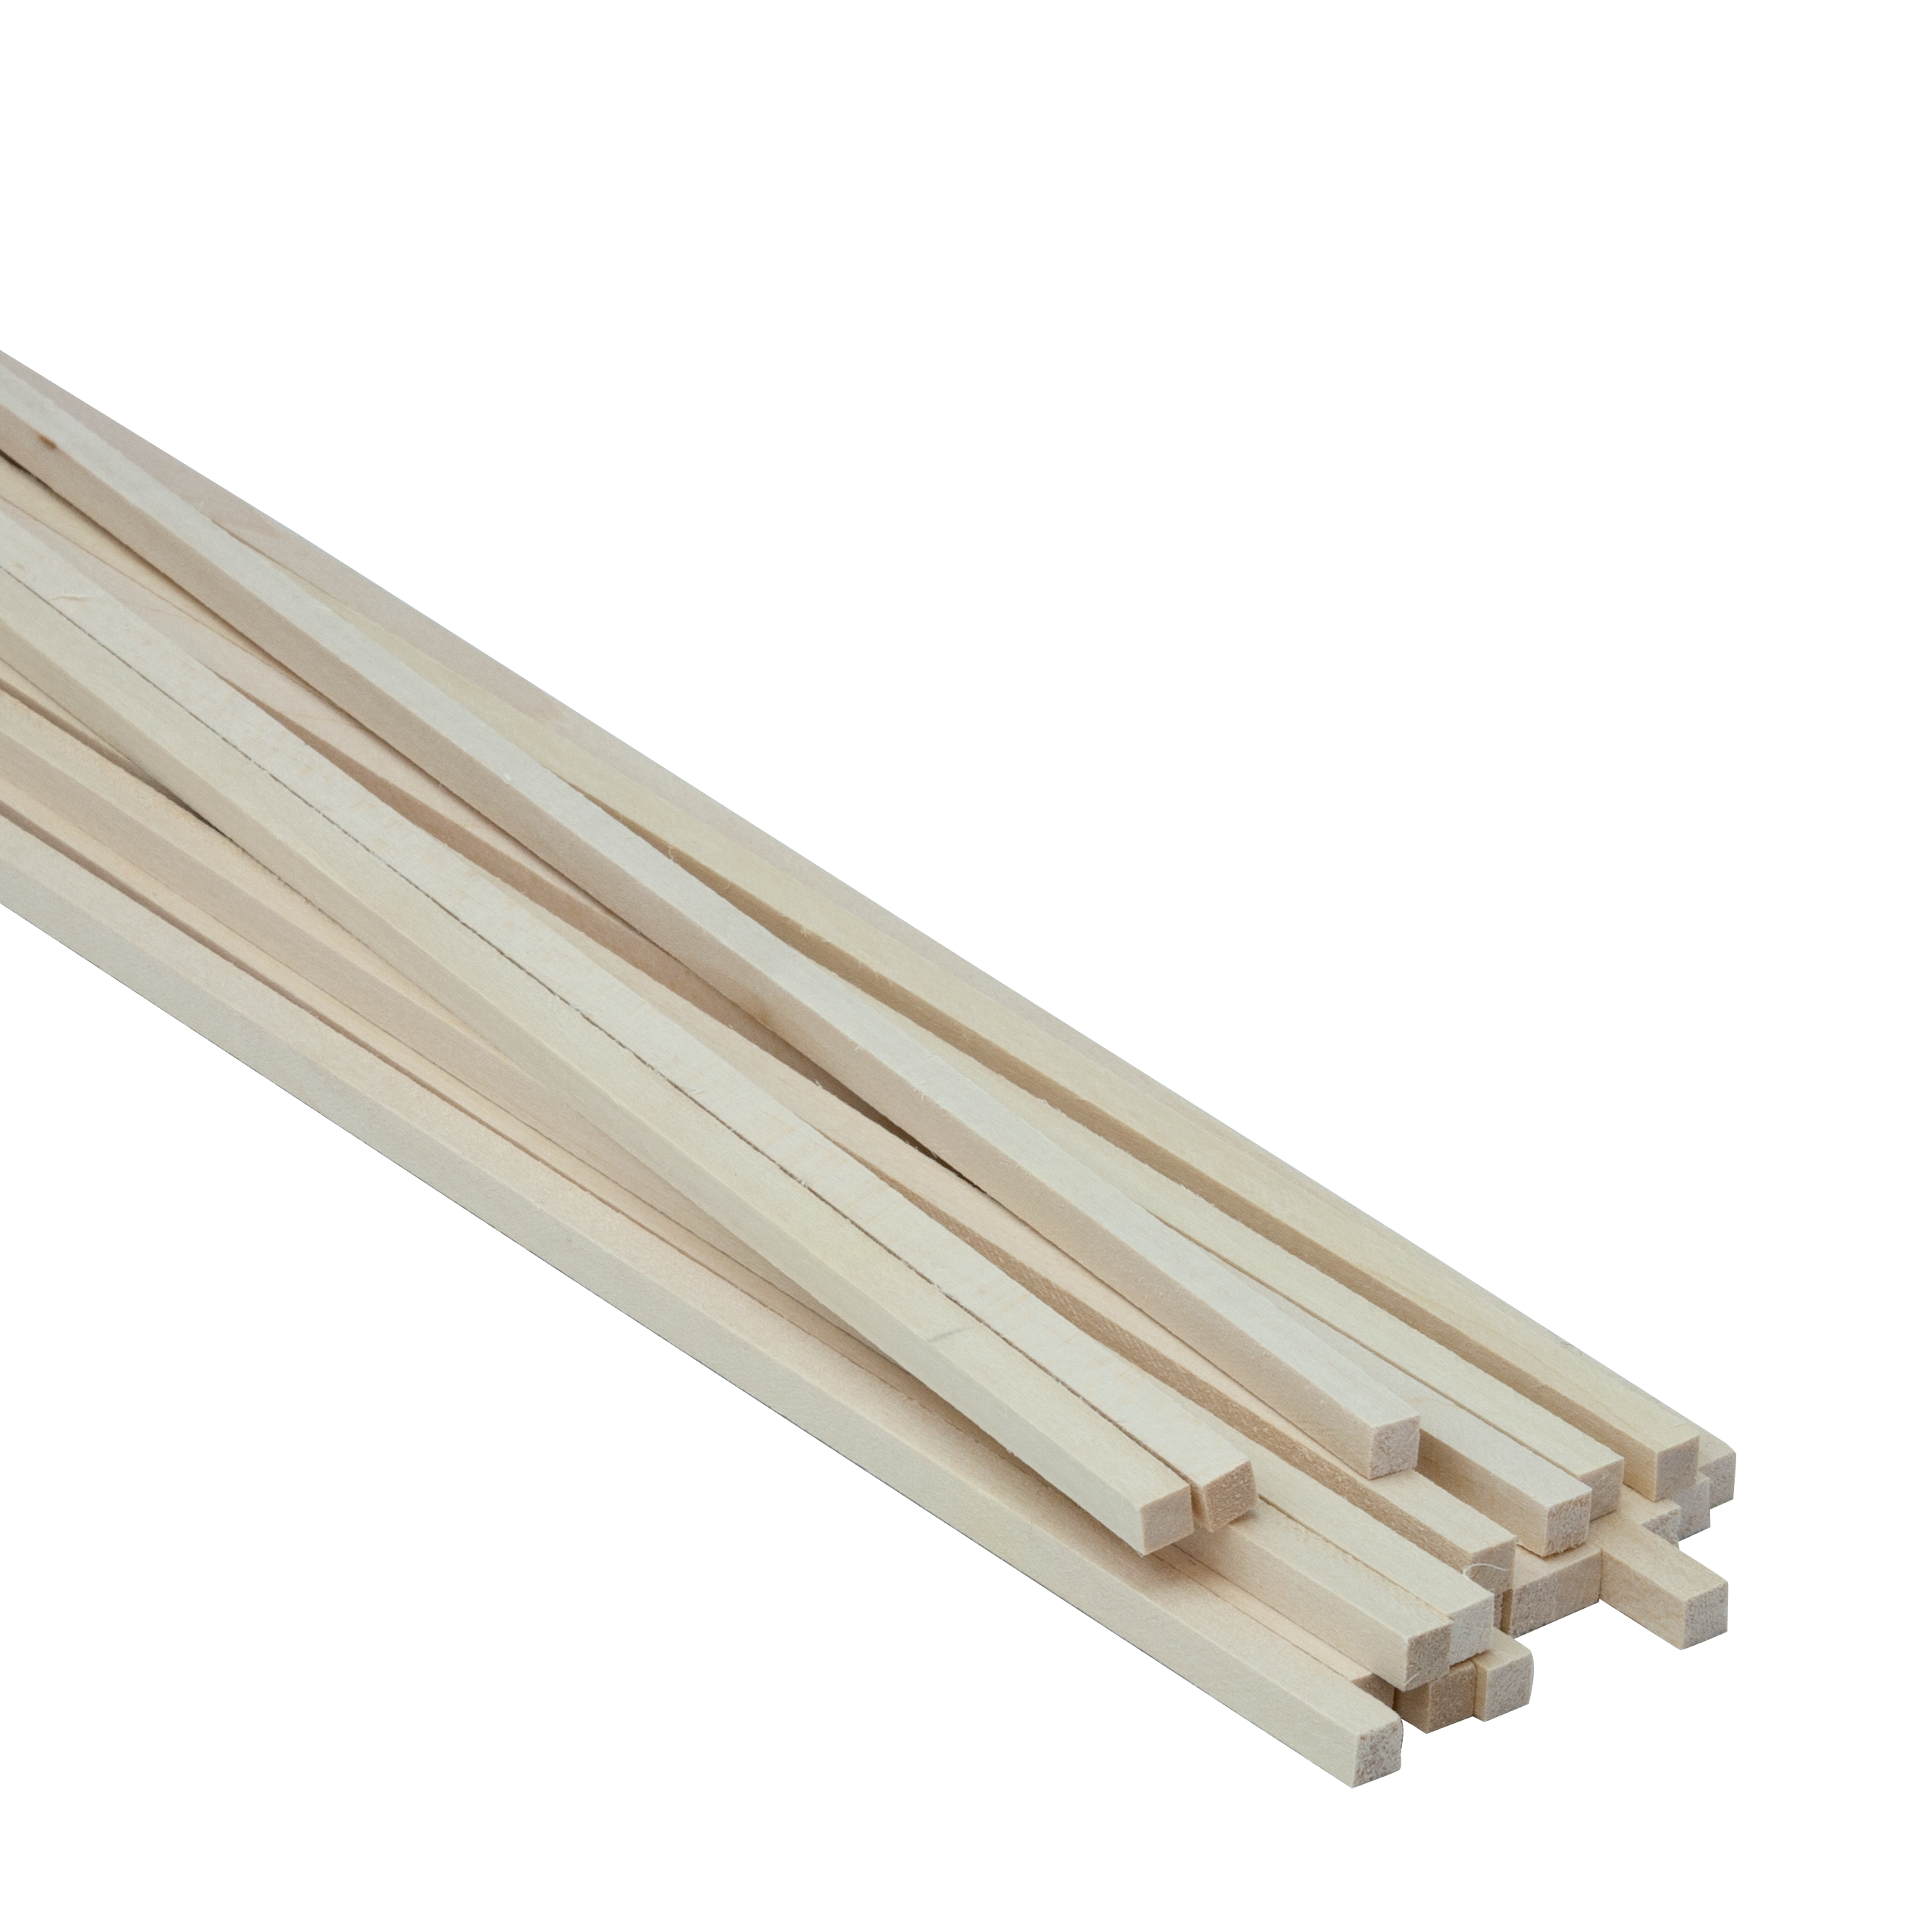 Midwest Products Basswood Sheets - 15 Pieces, 1/32 x 3 x 24 - Basswood